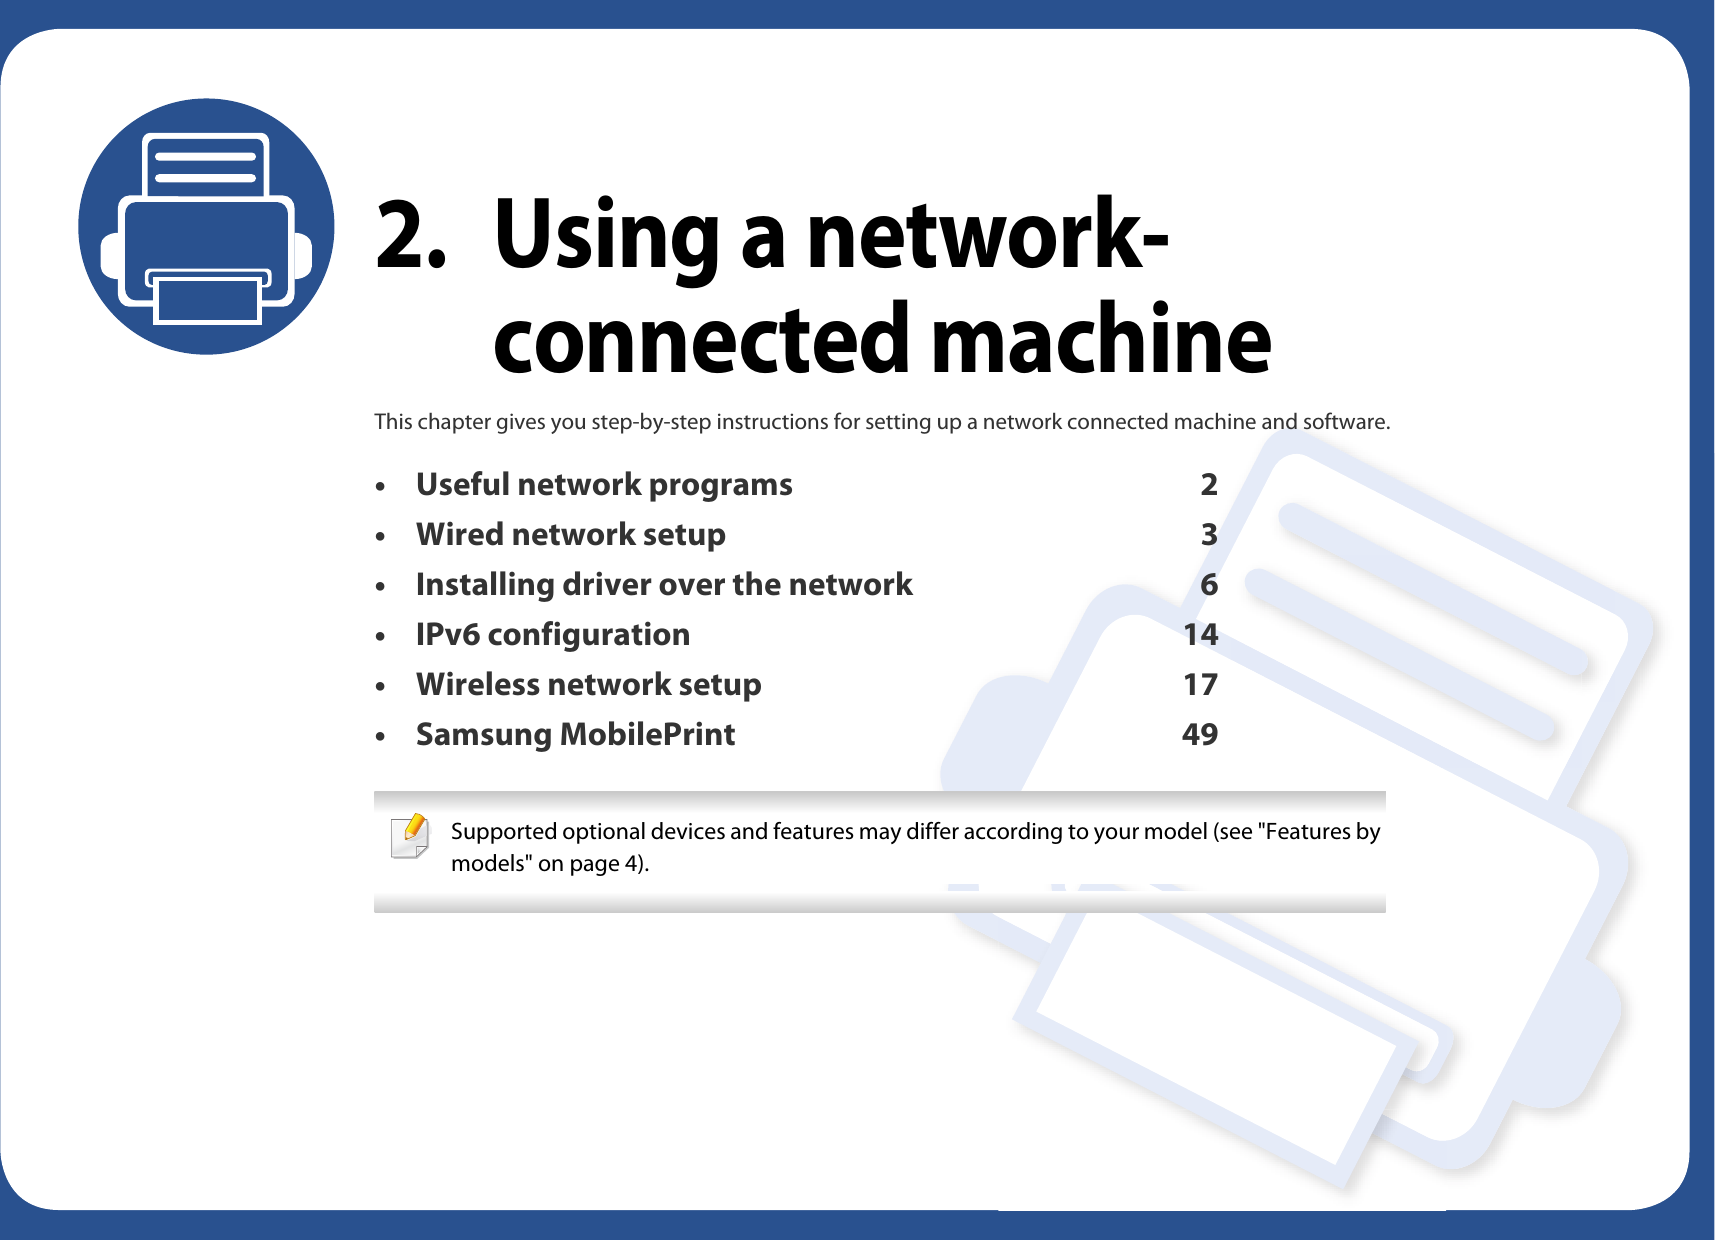 2. Using a network-connected machineThis chapter gives you step-by-step instructions for setting up a network connected machine and software.• Useful network programs 2• Wired network setup 3• Installing driver over the network 6• IPv6 configuration 14• Wireless network setup 17• Samsung MobilePrint 49 Supported optional devices and features may differ according to your model (see &quot;Features by models&quot; on page 4). 